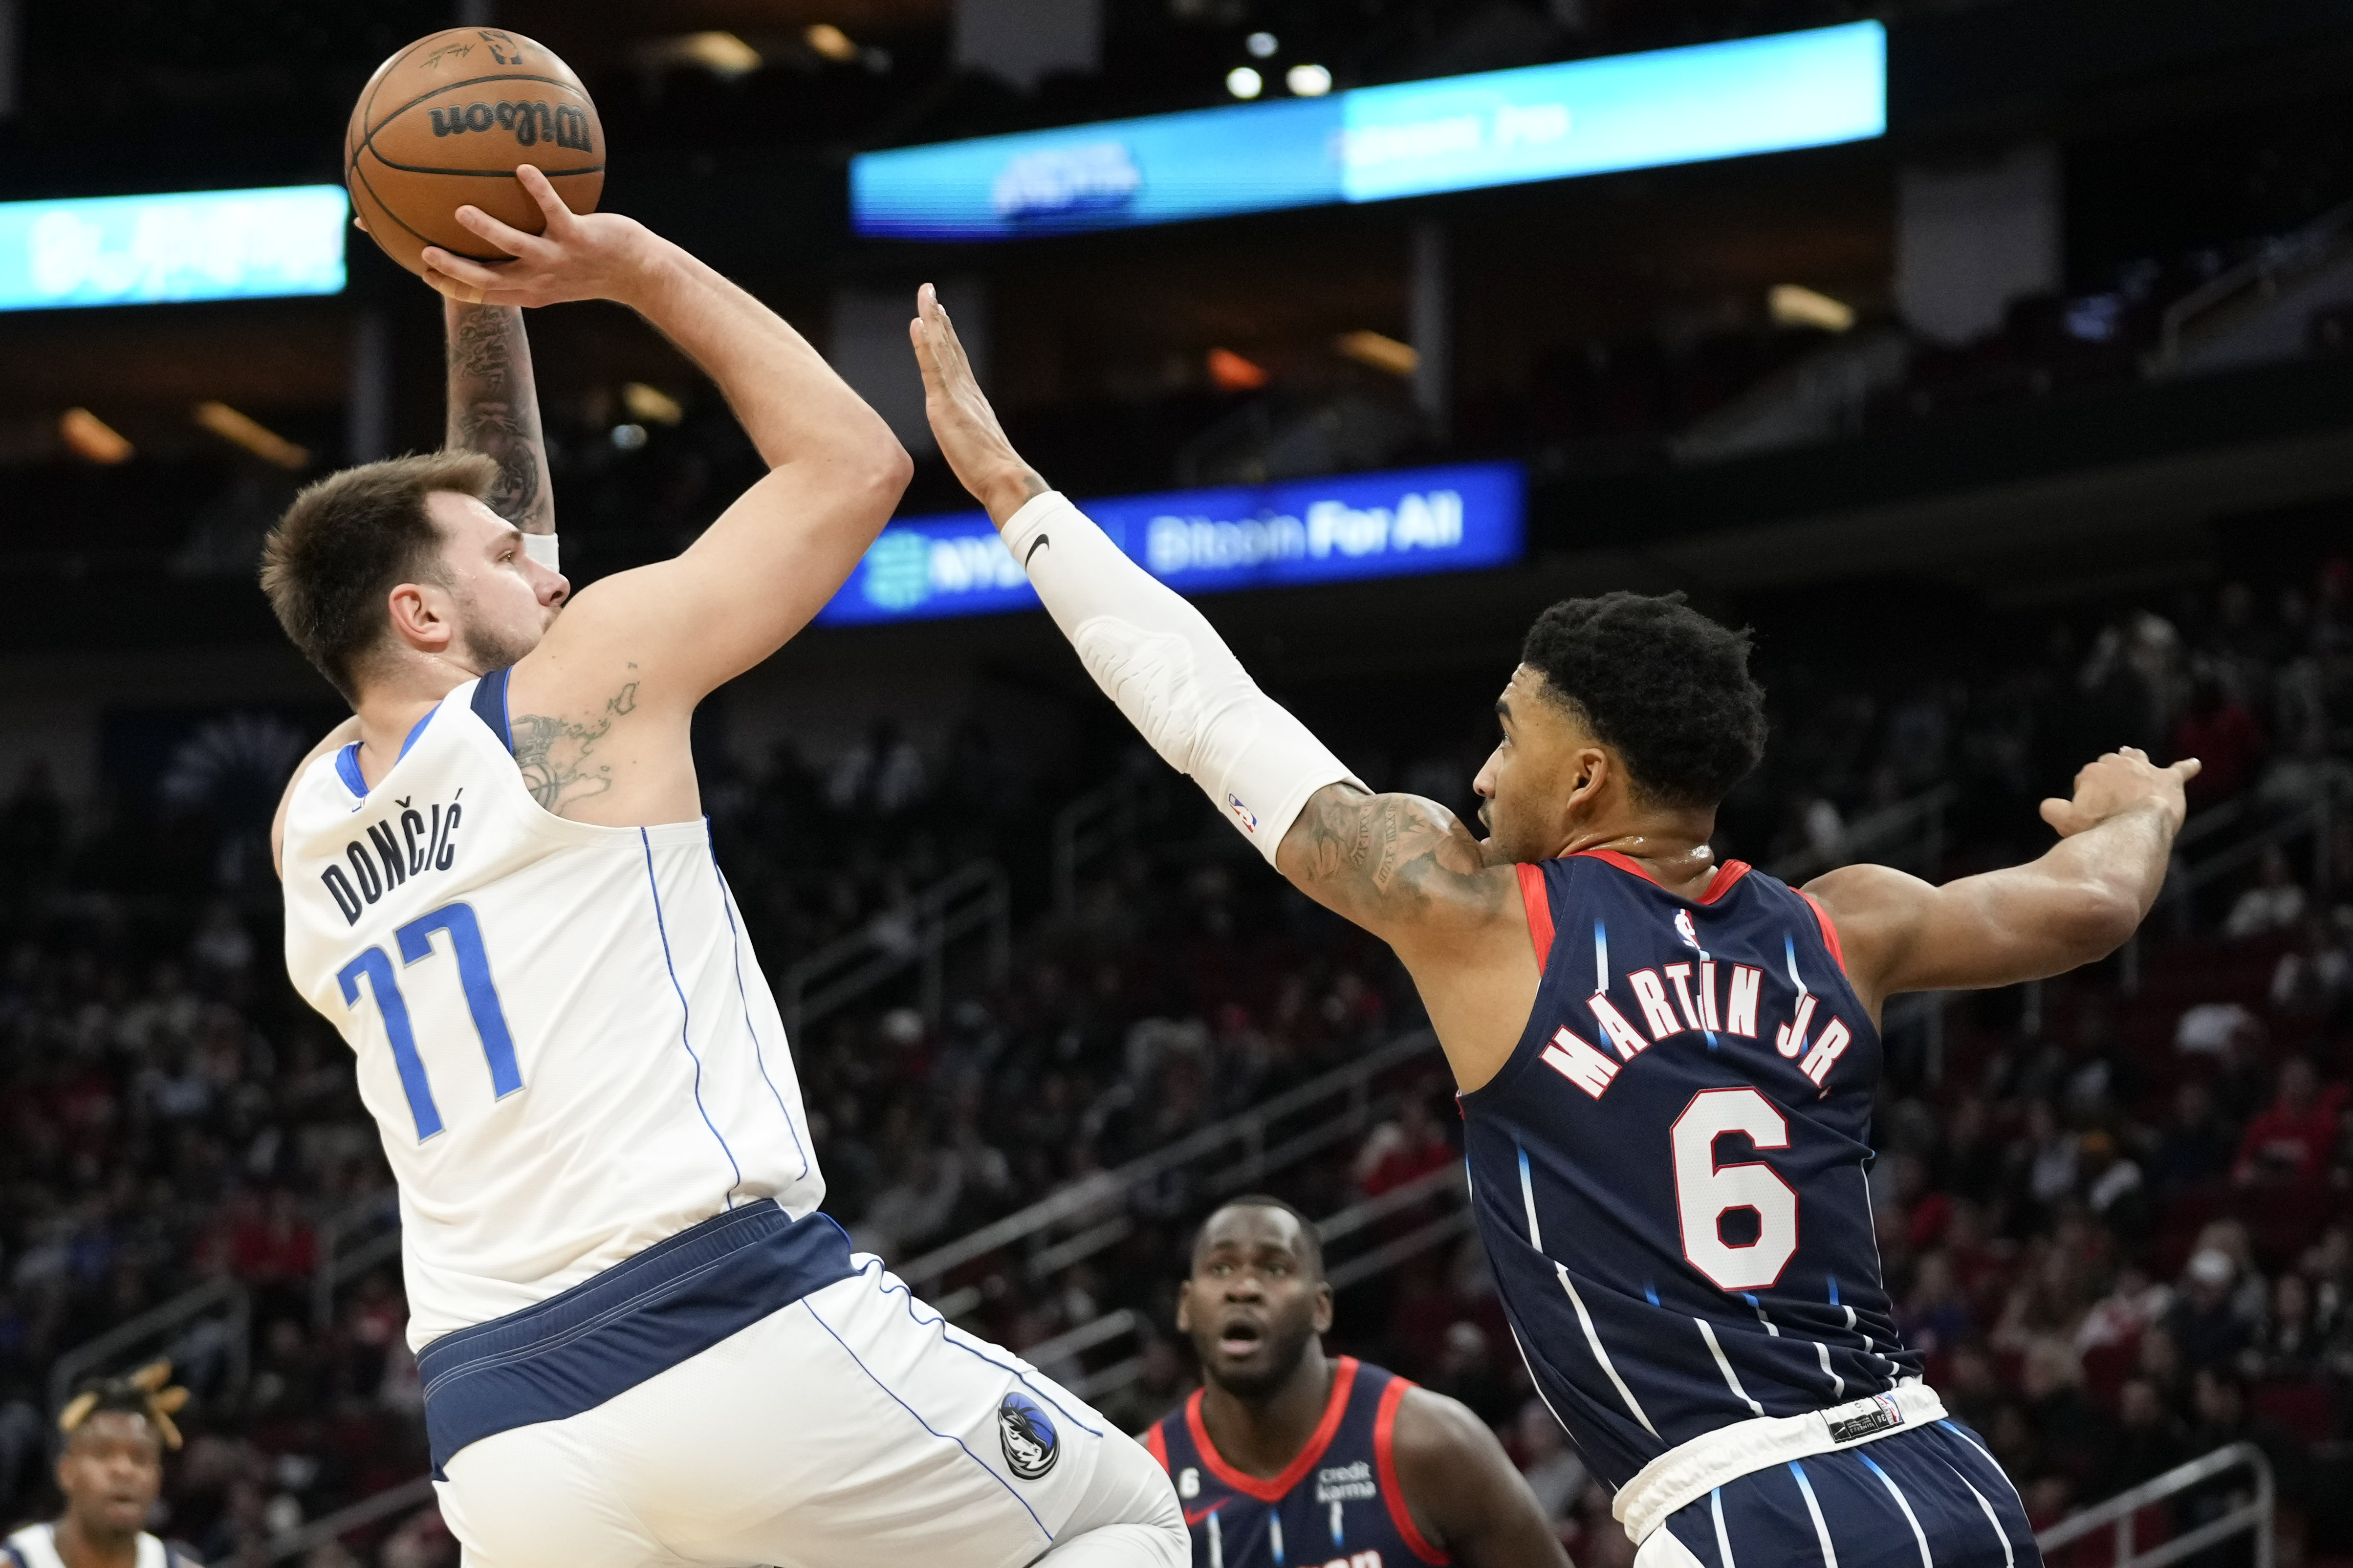 Luka Doncic Is Playing With His Back to the Basket and His Eye on